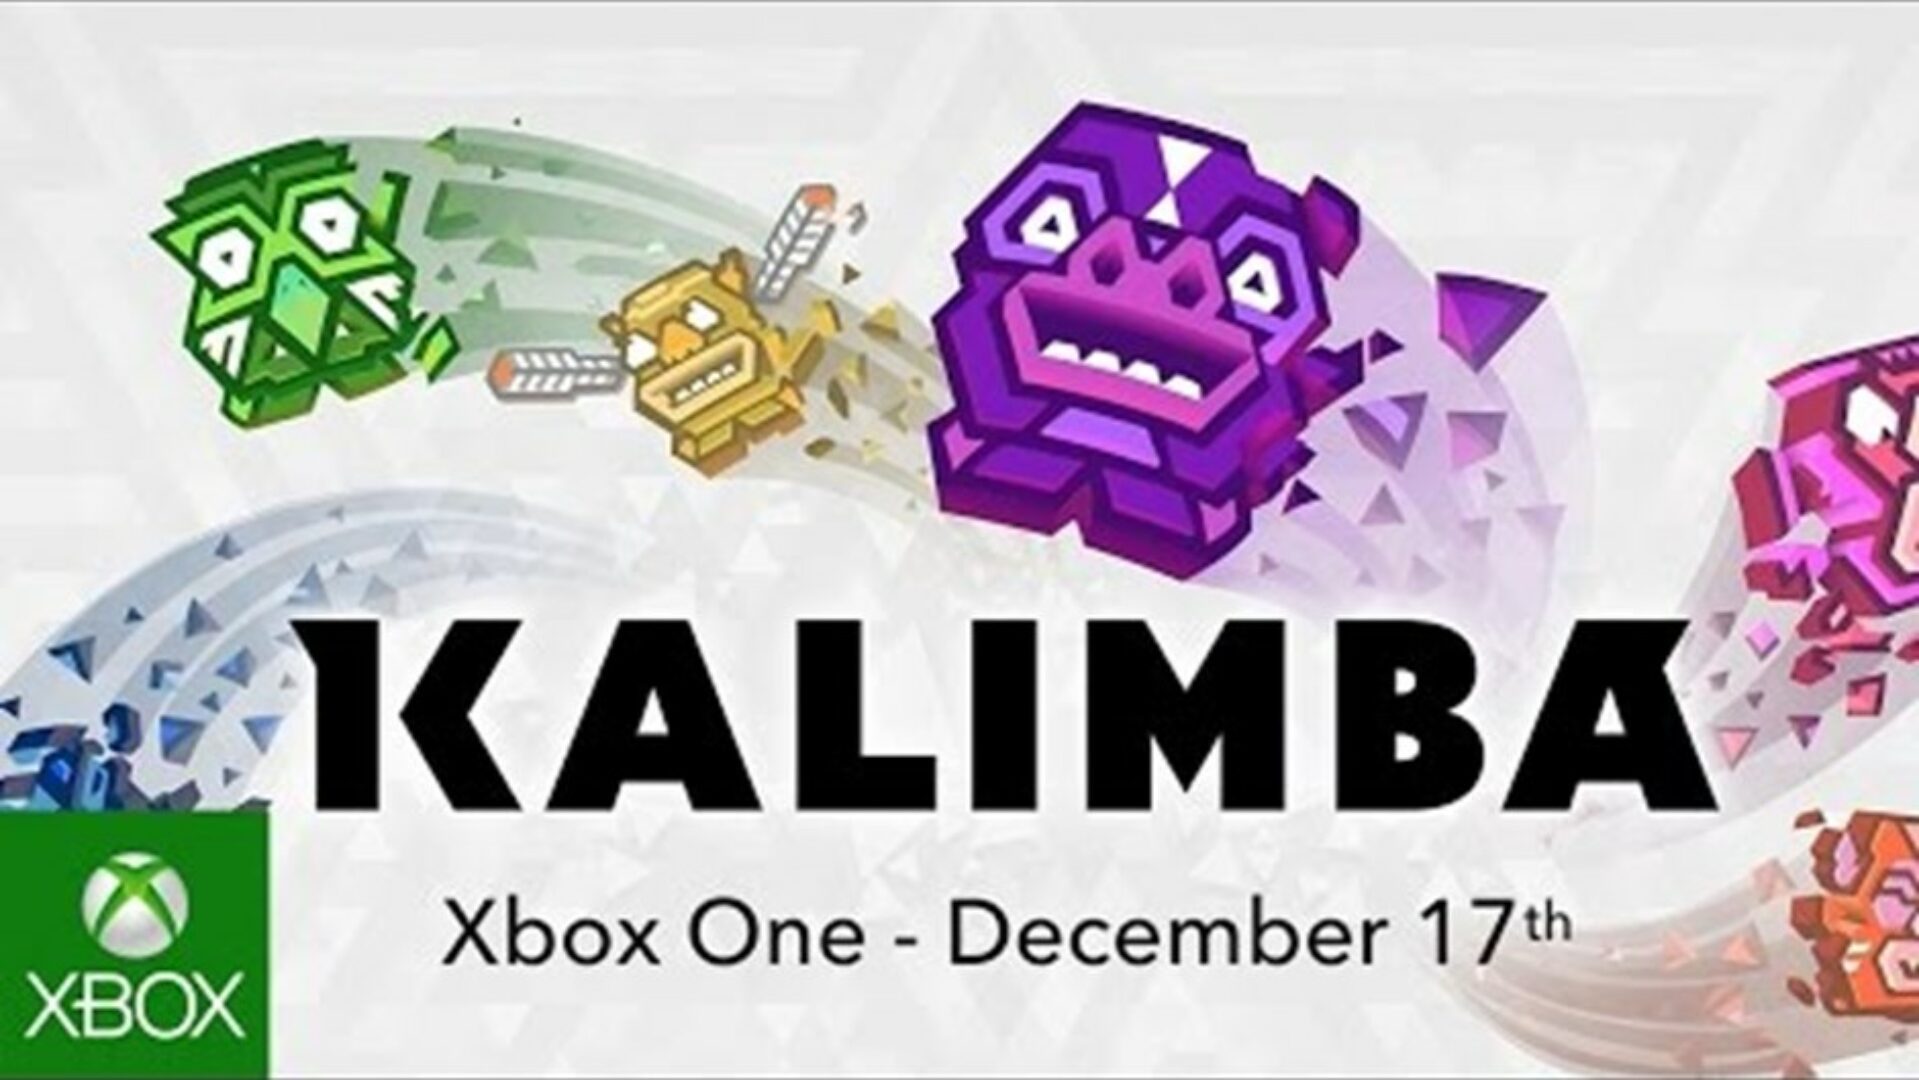 Press Play’s Kalimba Coming December 17th, 2015 for Xbox One